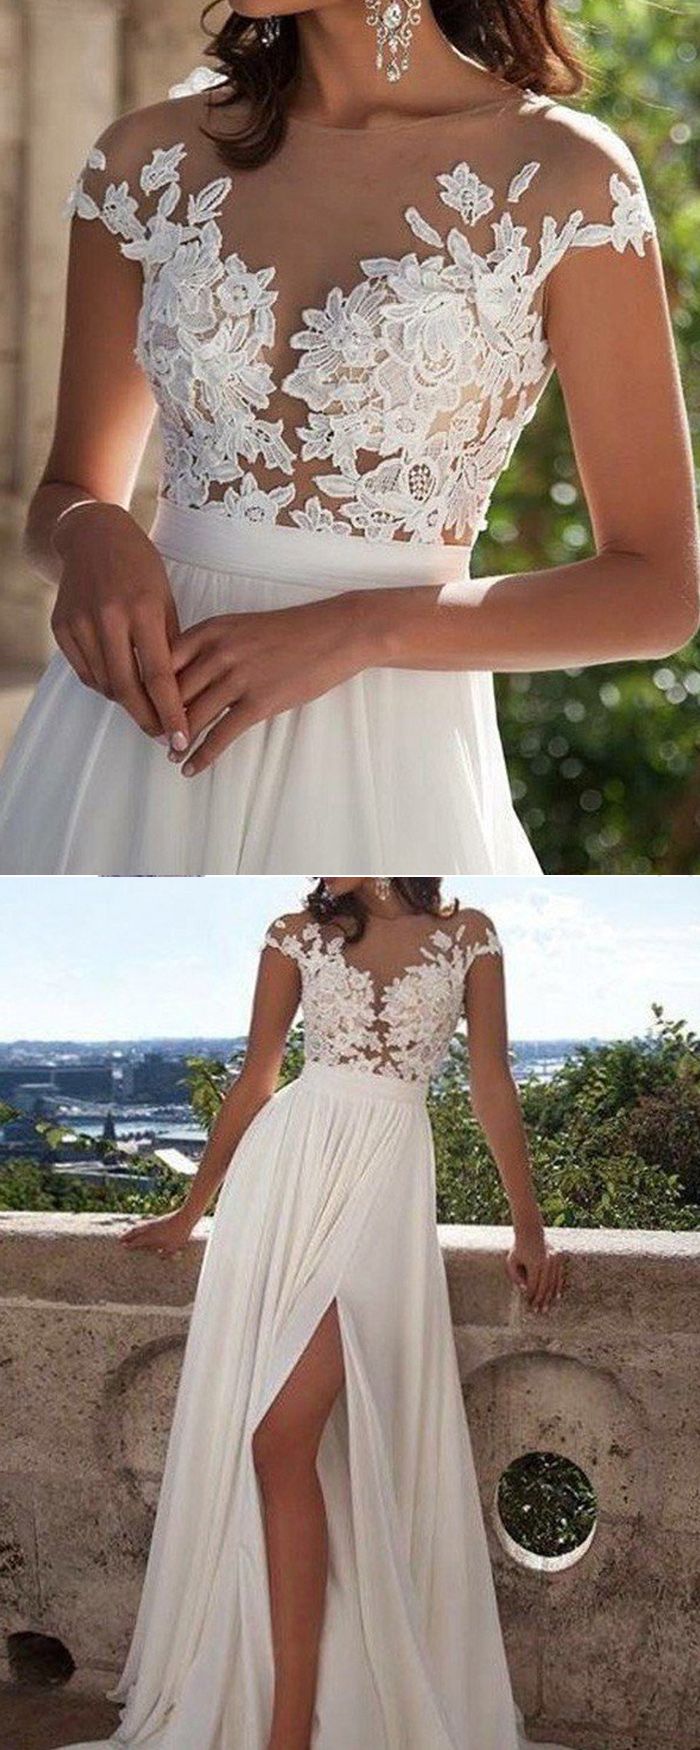 Sheer Lace Appliqued Ivory Chiffon Long Prom Dress with Side Slit PM1223